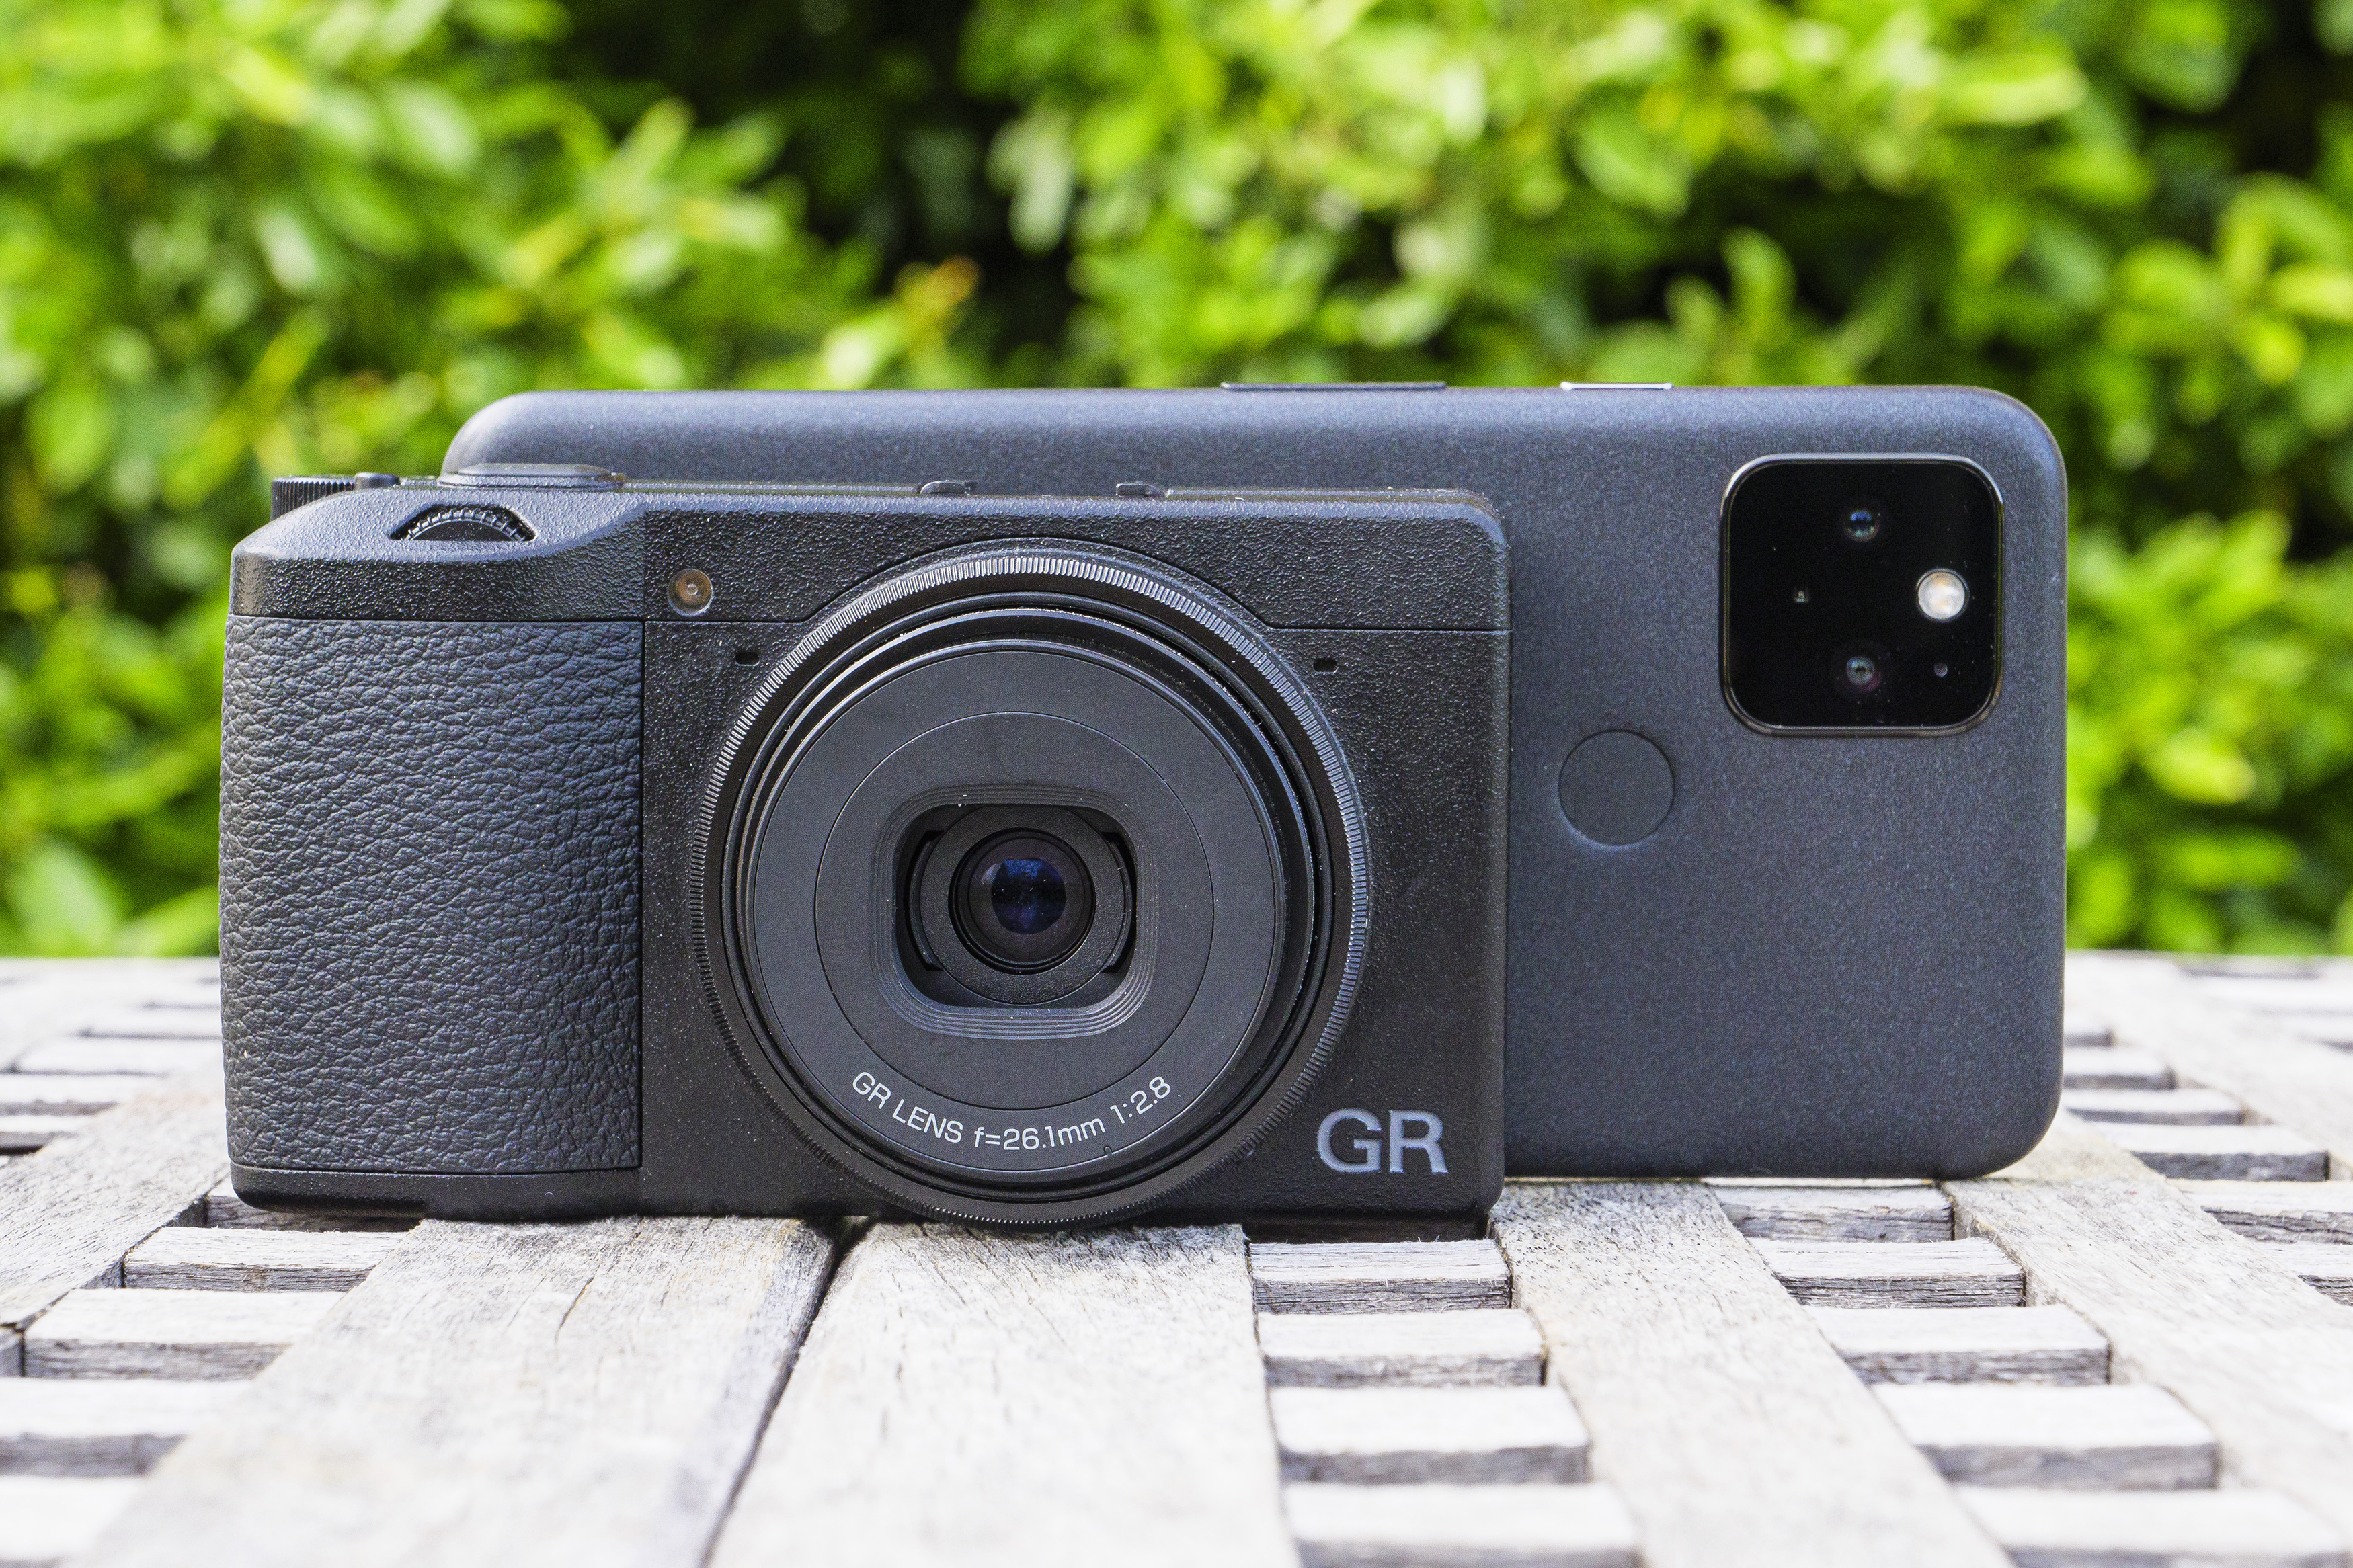 The Ricoh GR III X compact camera in front of a smartphone